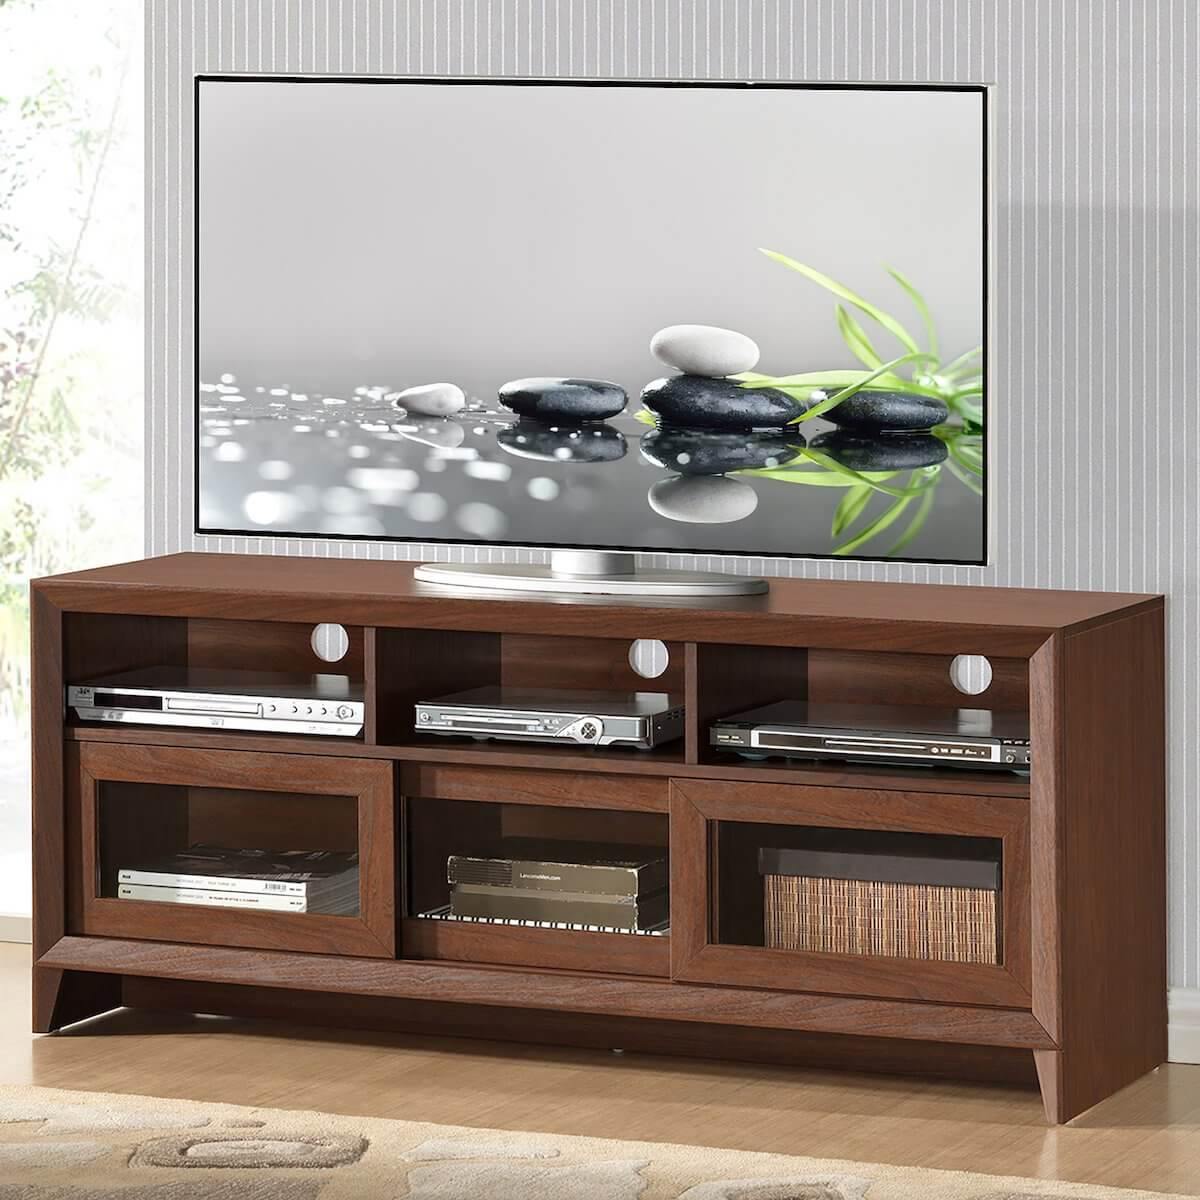 Techni Mobili Hickory Modern TV Stand with Storage for TVs Up To 60" RTA-8811-HRY with Tv in Room